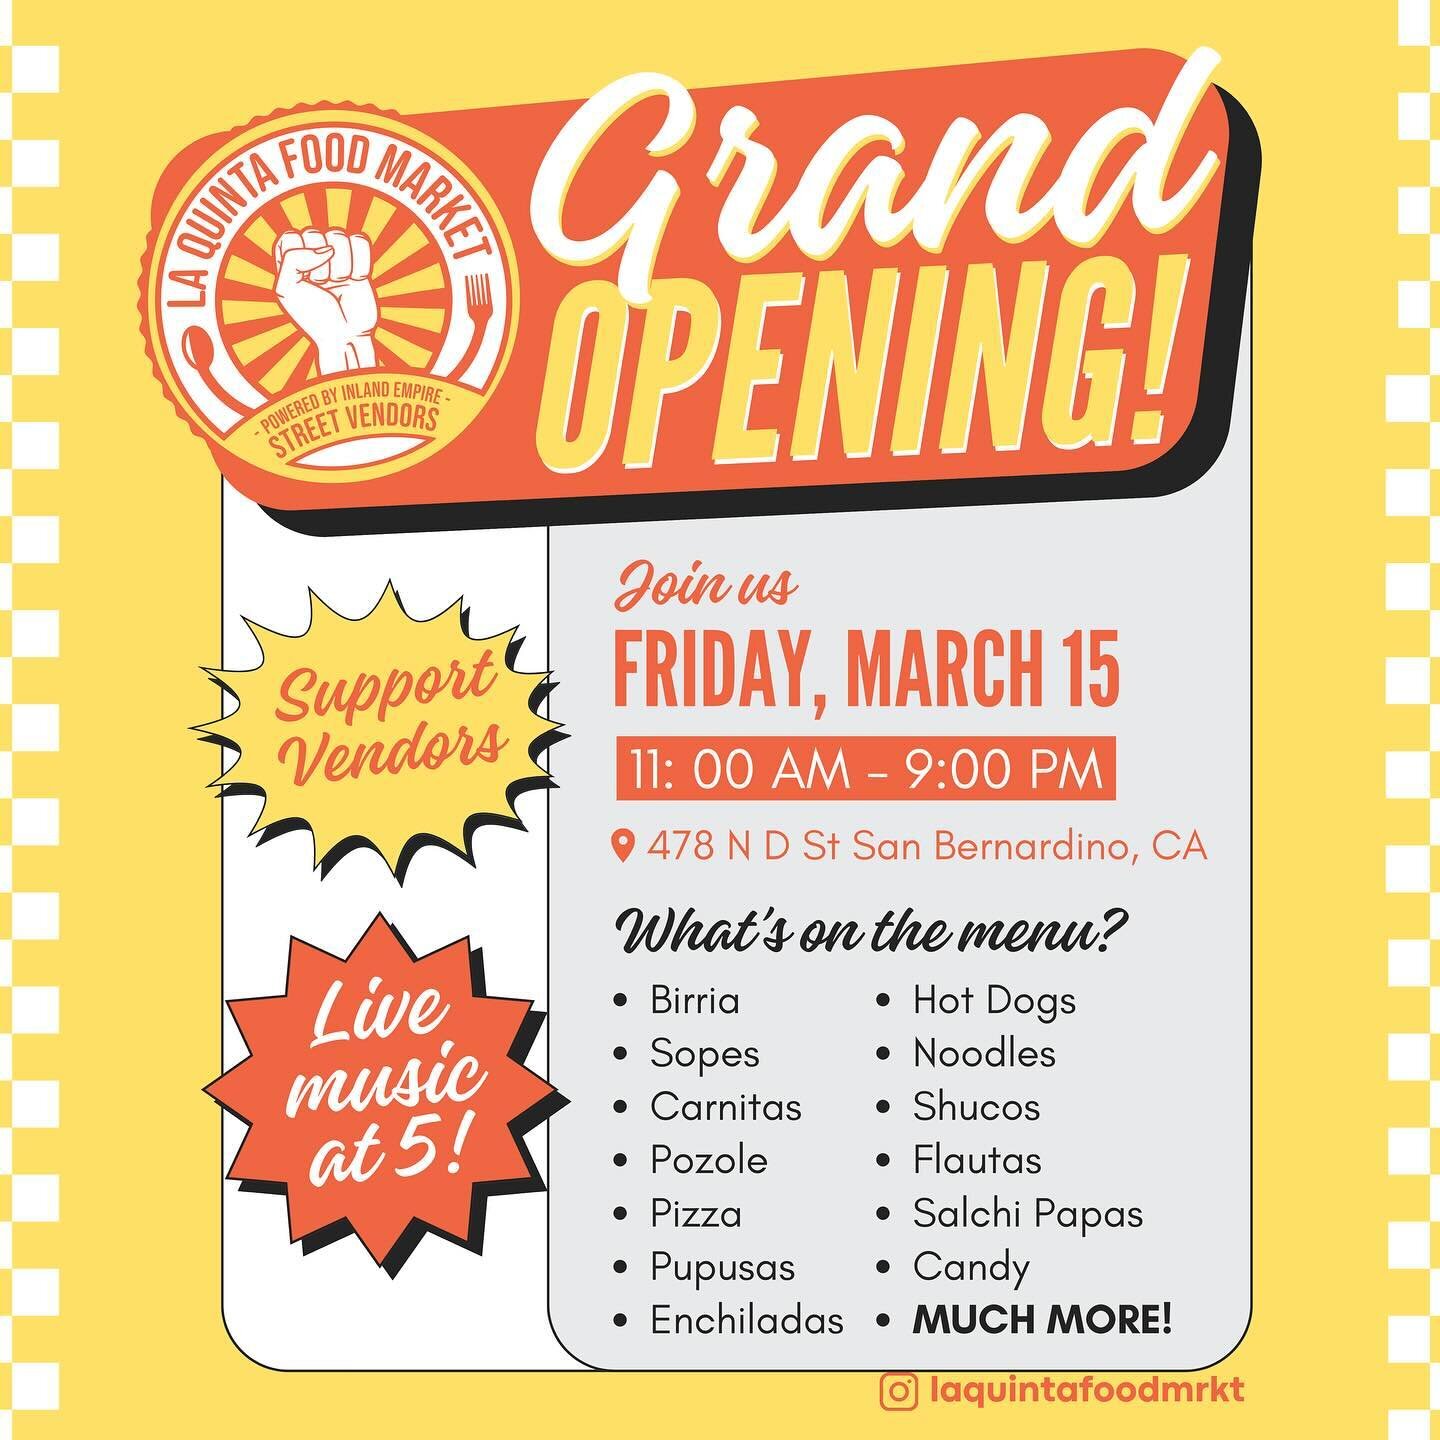 We are proud to be a partner with @laquintafoodmrkt and announce their grand opening!!! TODAY!!! After a year of collaboration with @ic4ij and the proud entrepreneurs that make up @laquintafoodmrkt, we were able to get the city to approve this specia